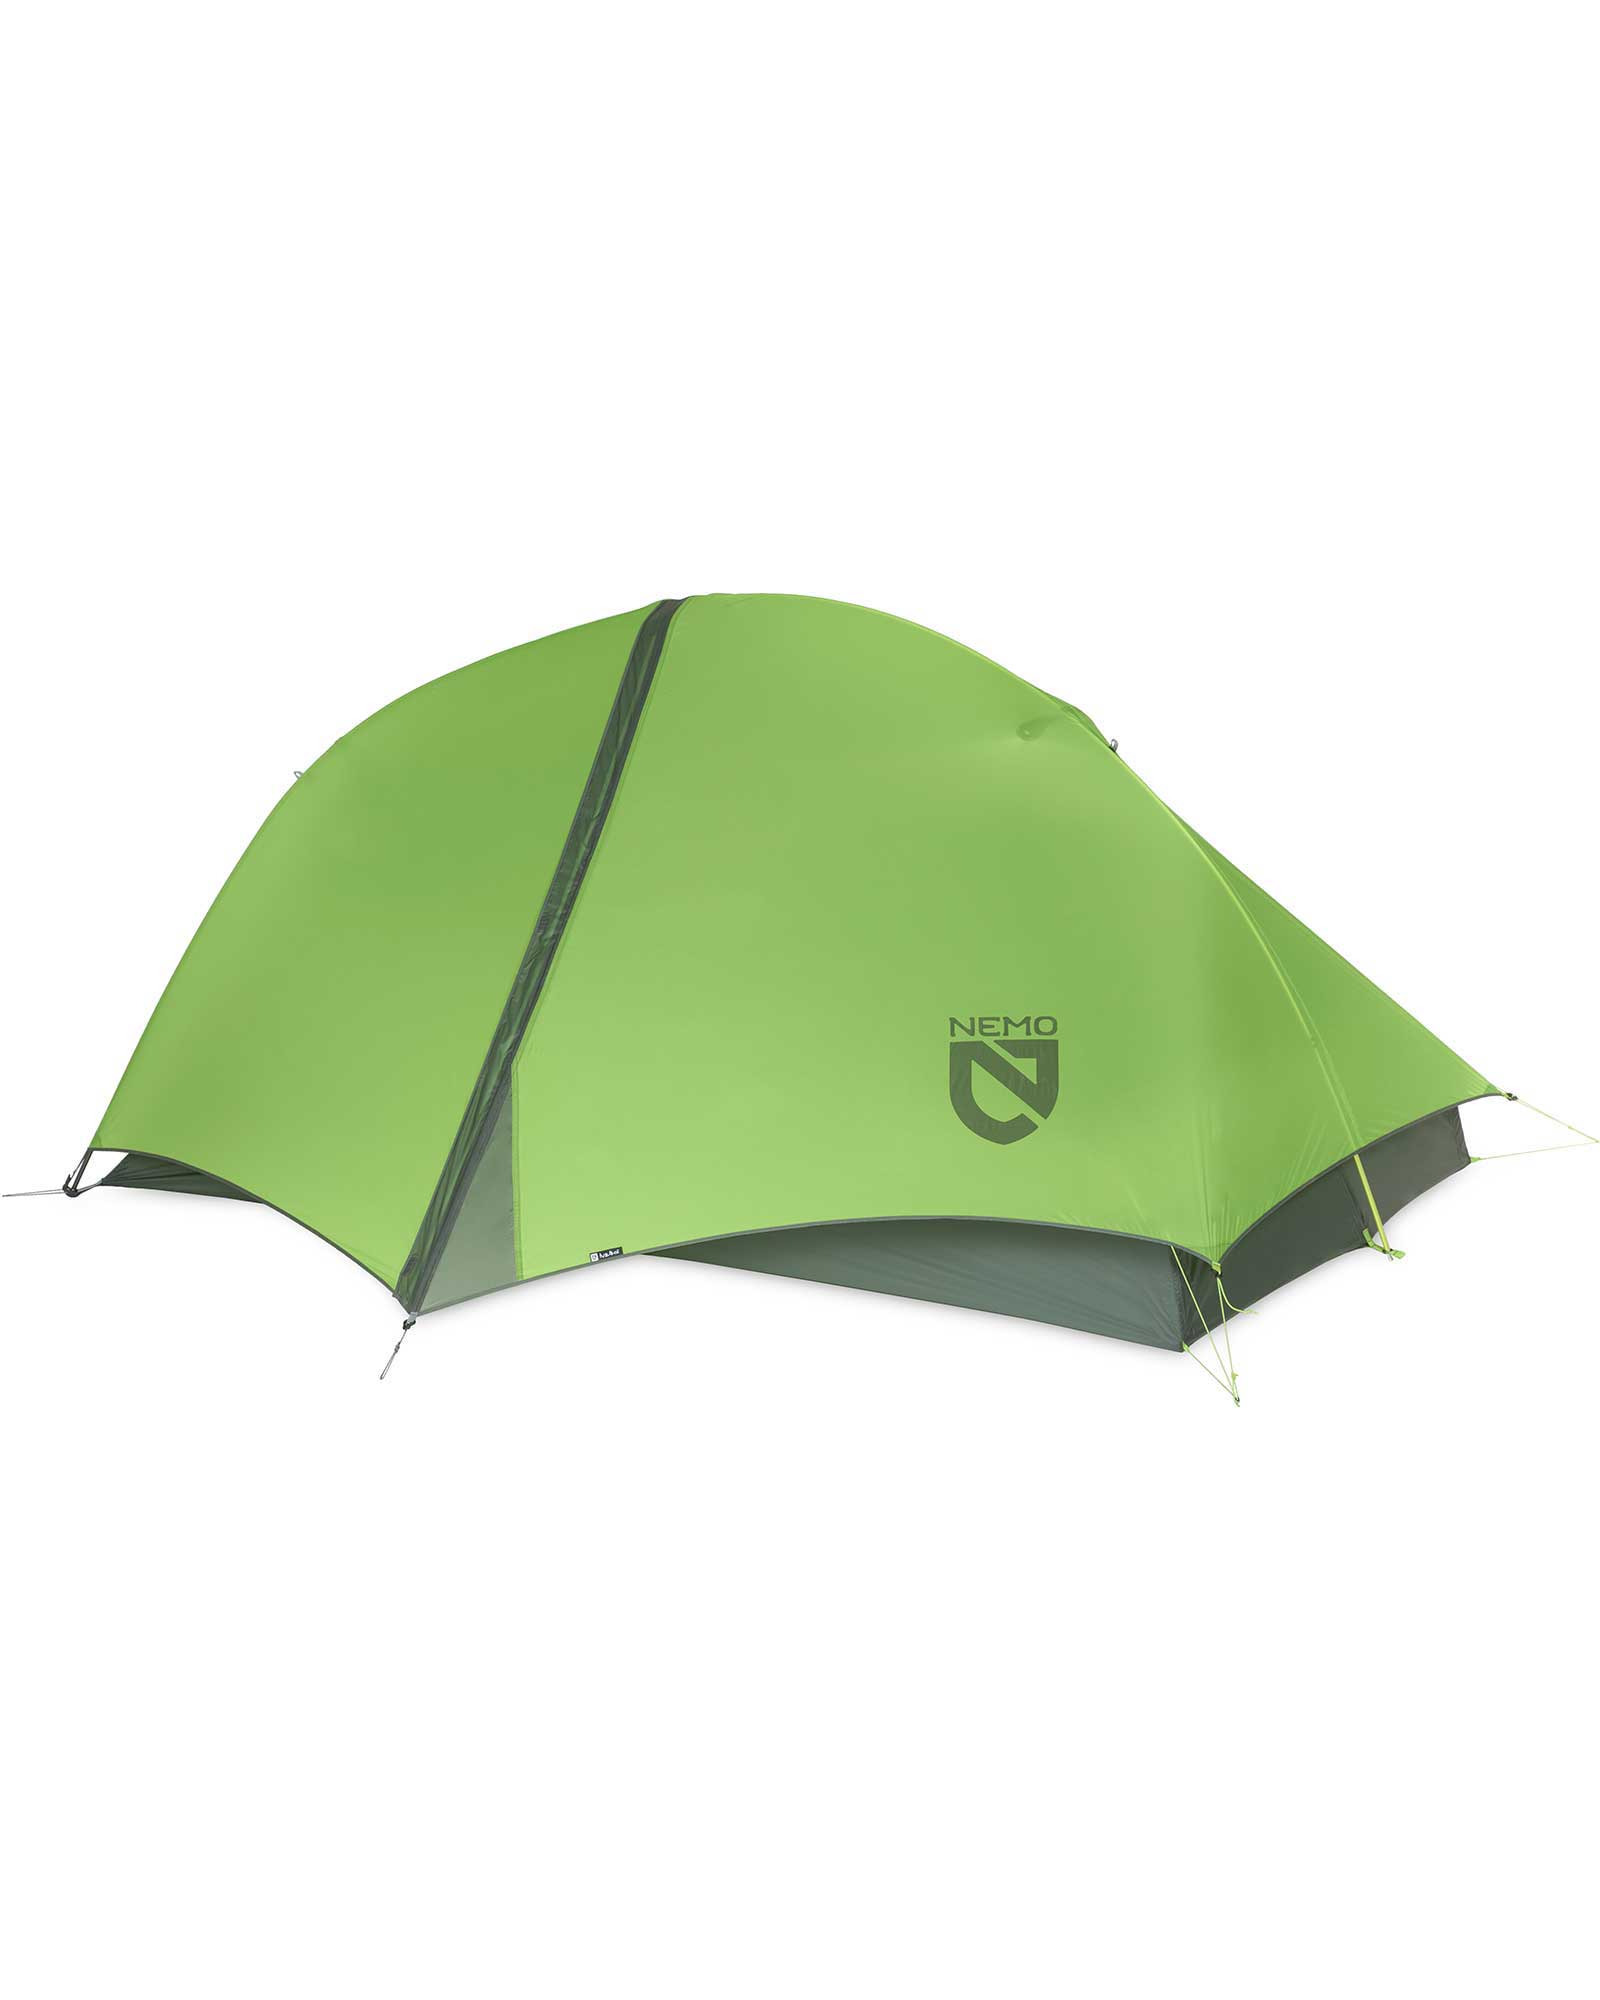 Product image of Nemo Hornet 2P Tent